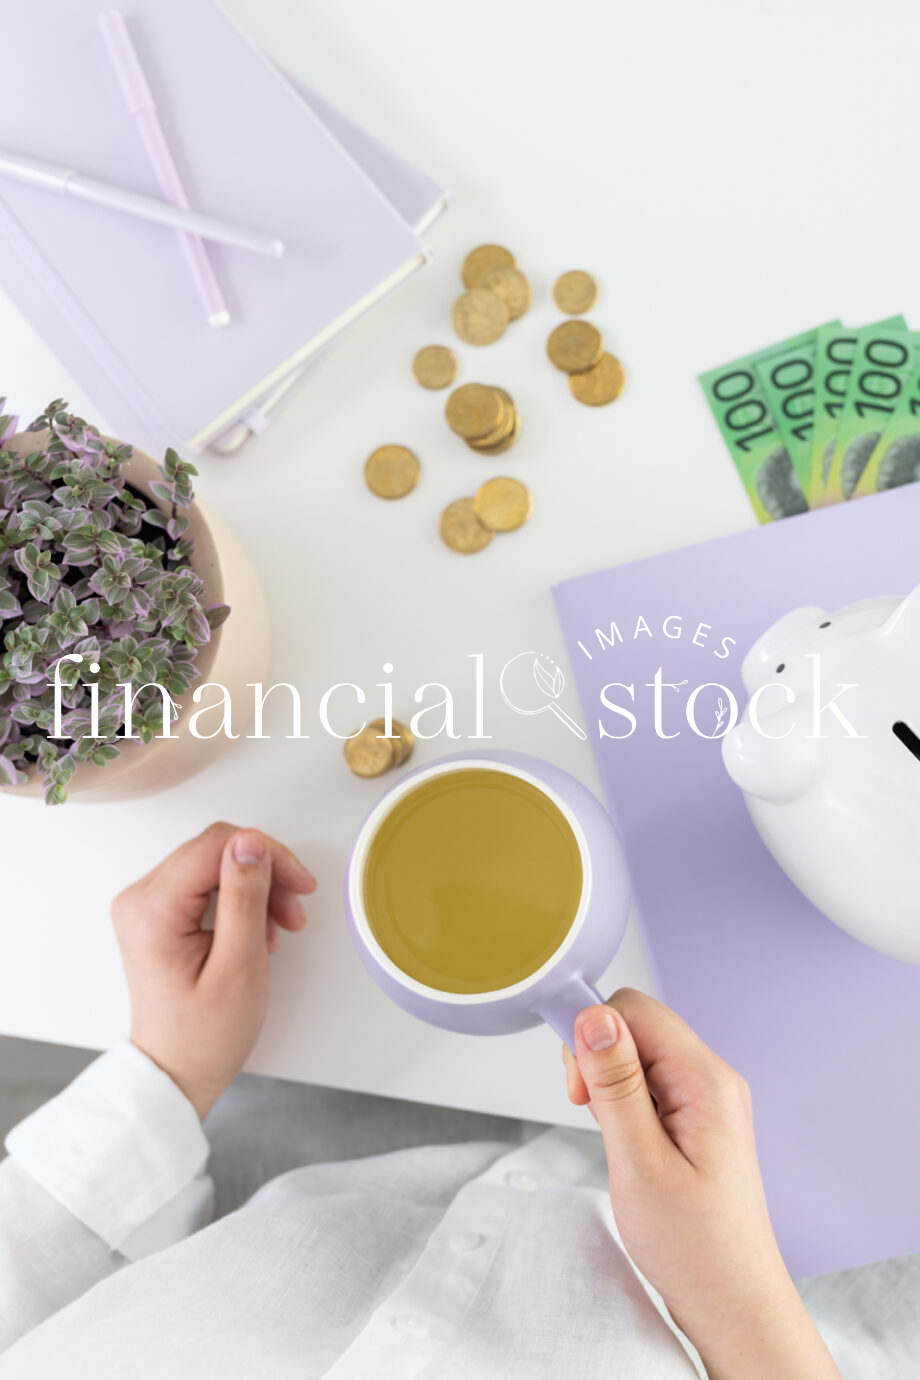 Financial, Stock, Images, Lilac, Office, Images, Women, Money, Australian, Finance, Bookkeeper, Services, Business